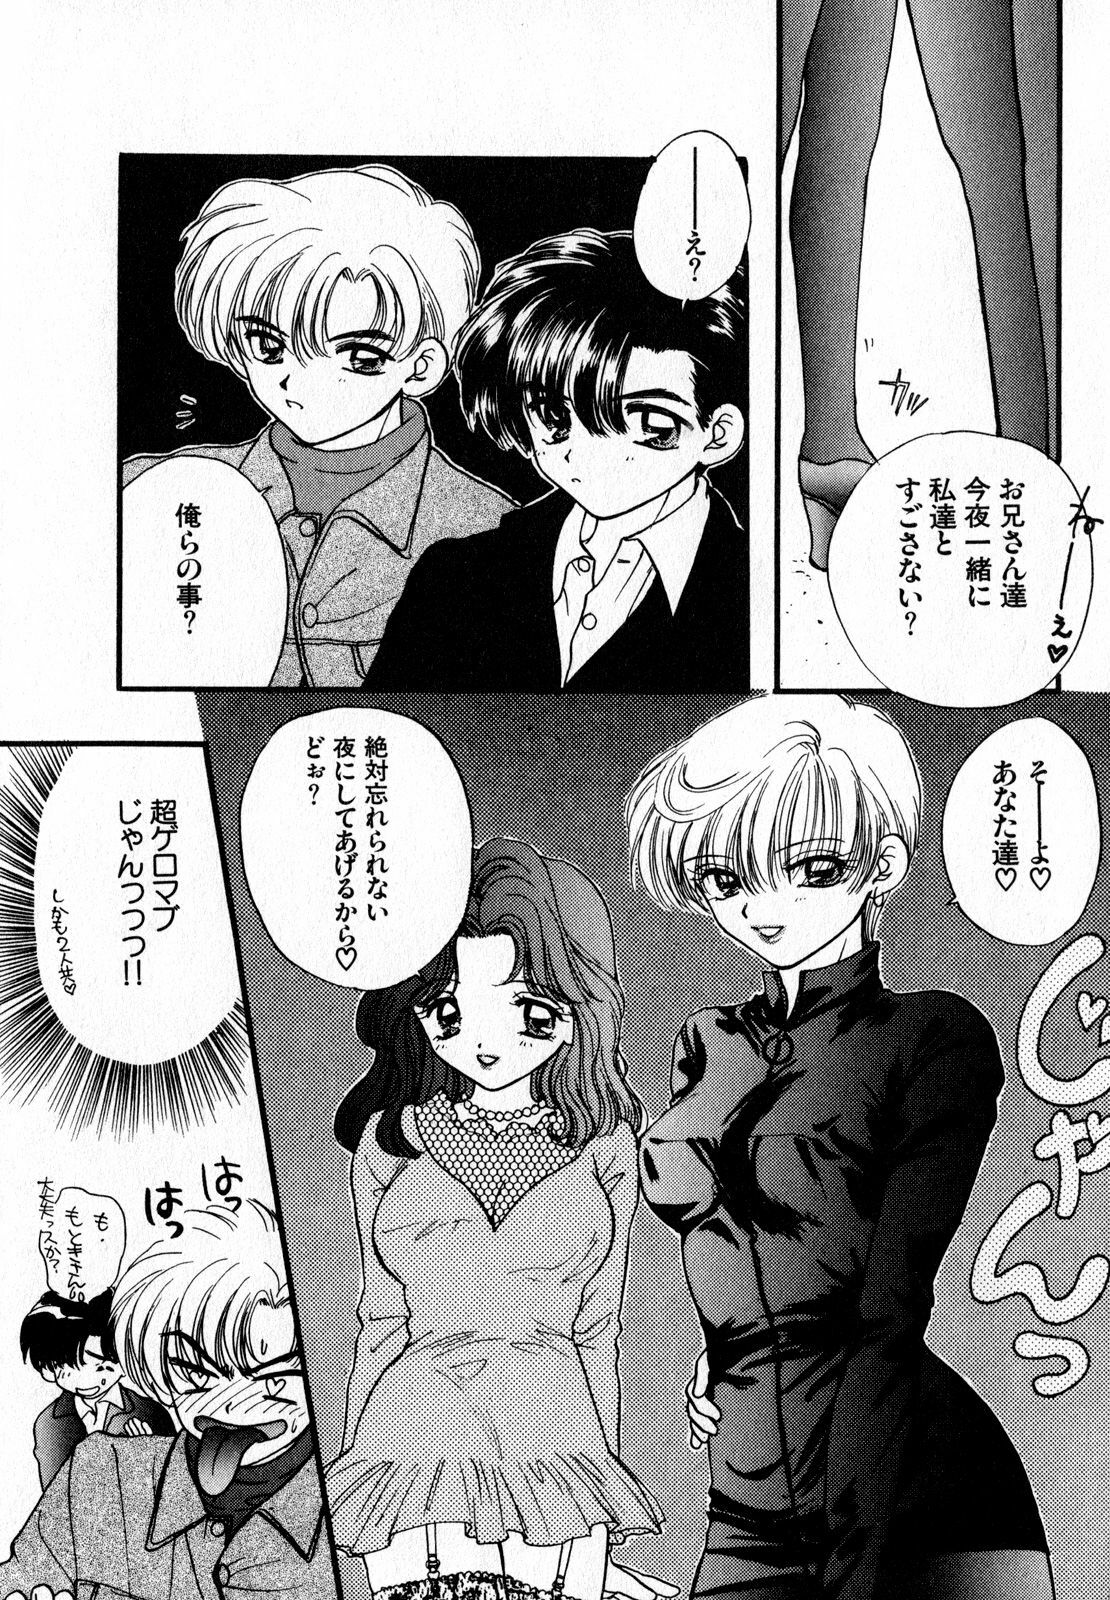 [Anthology] Lunatic Party 7 (Sailor Moon) page 50 full